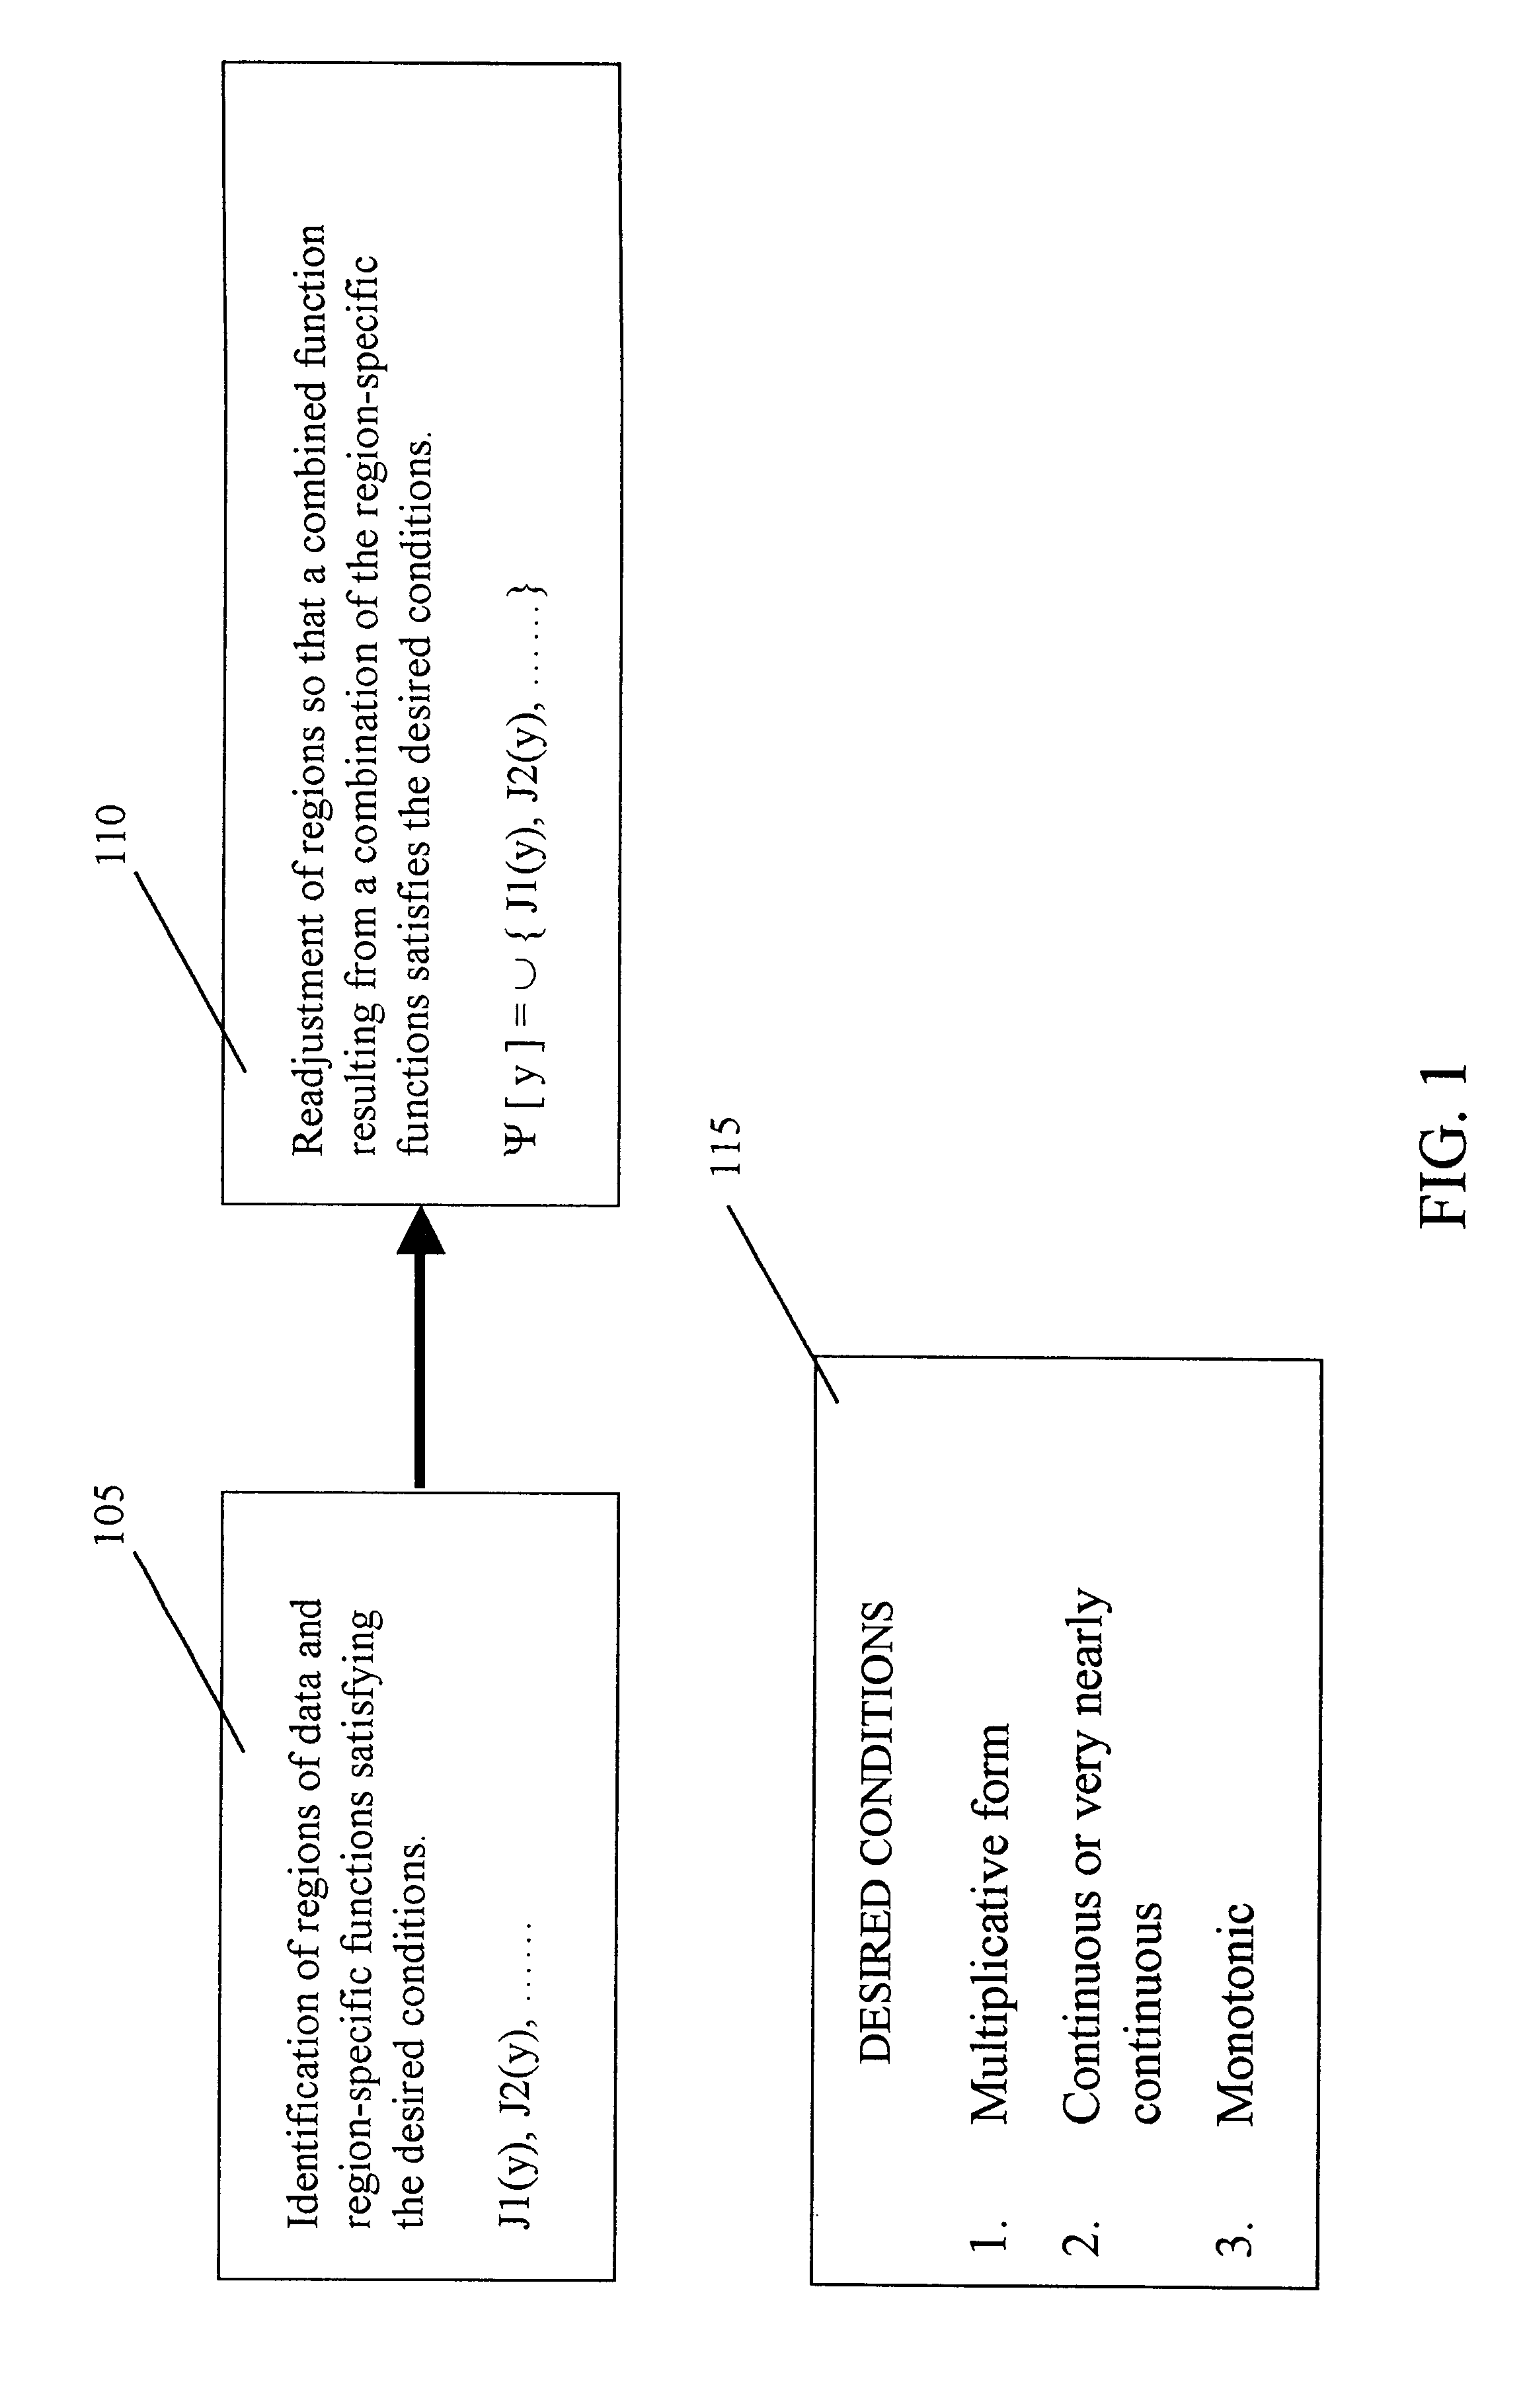 Employing a combined function for exception exploration in multidimensional data